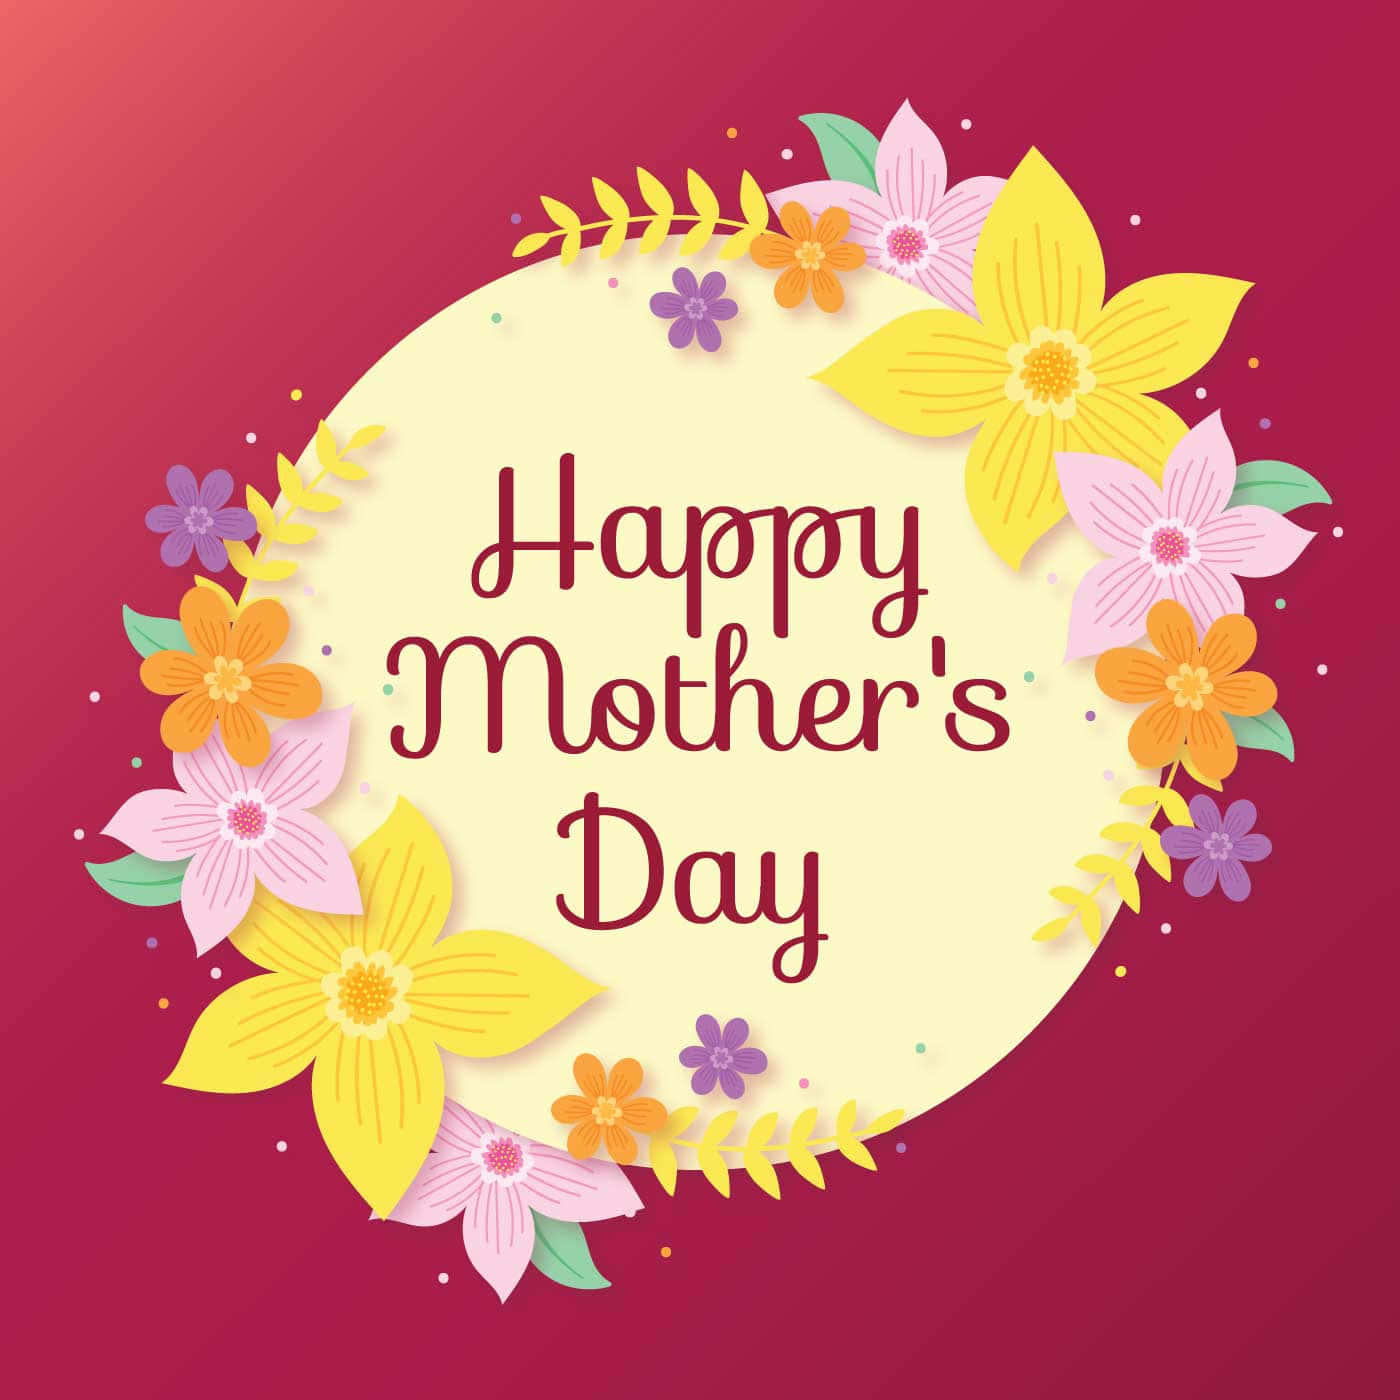 Celebrate your mom this Mother’s Day!